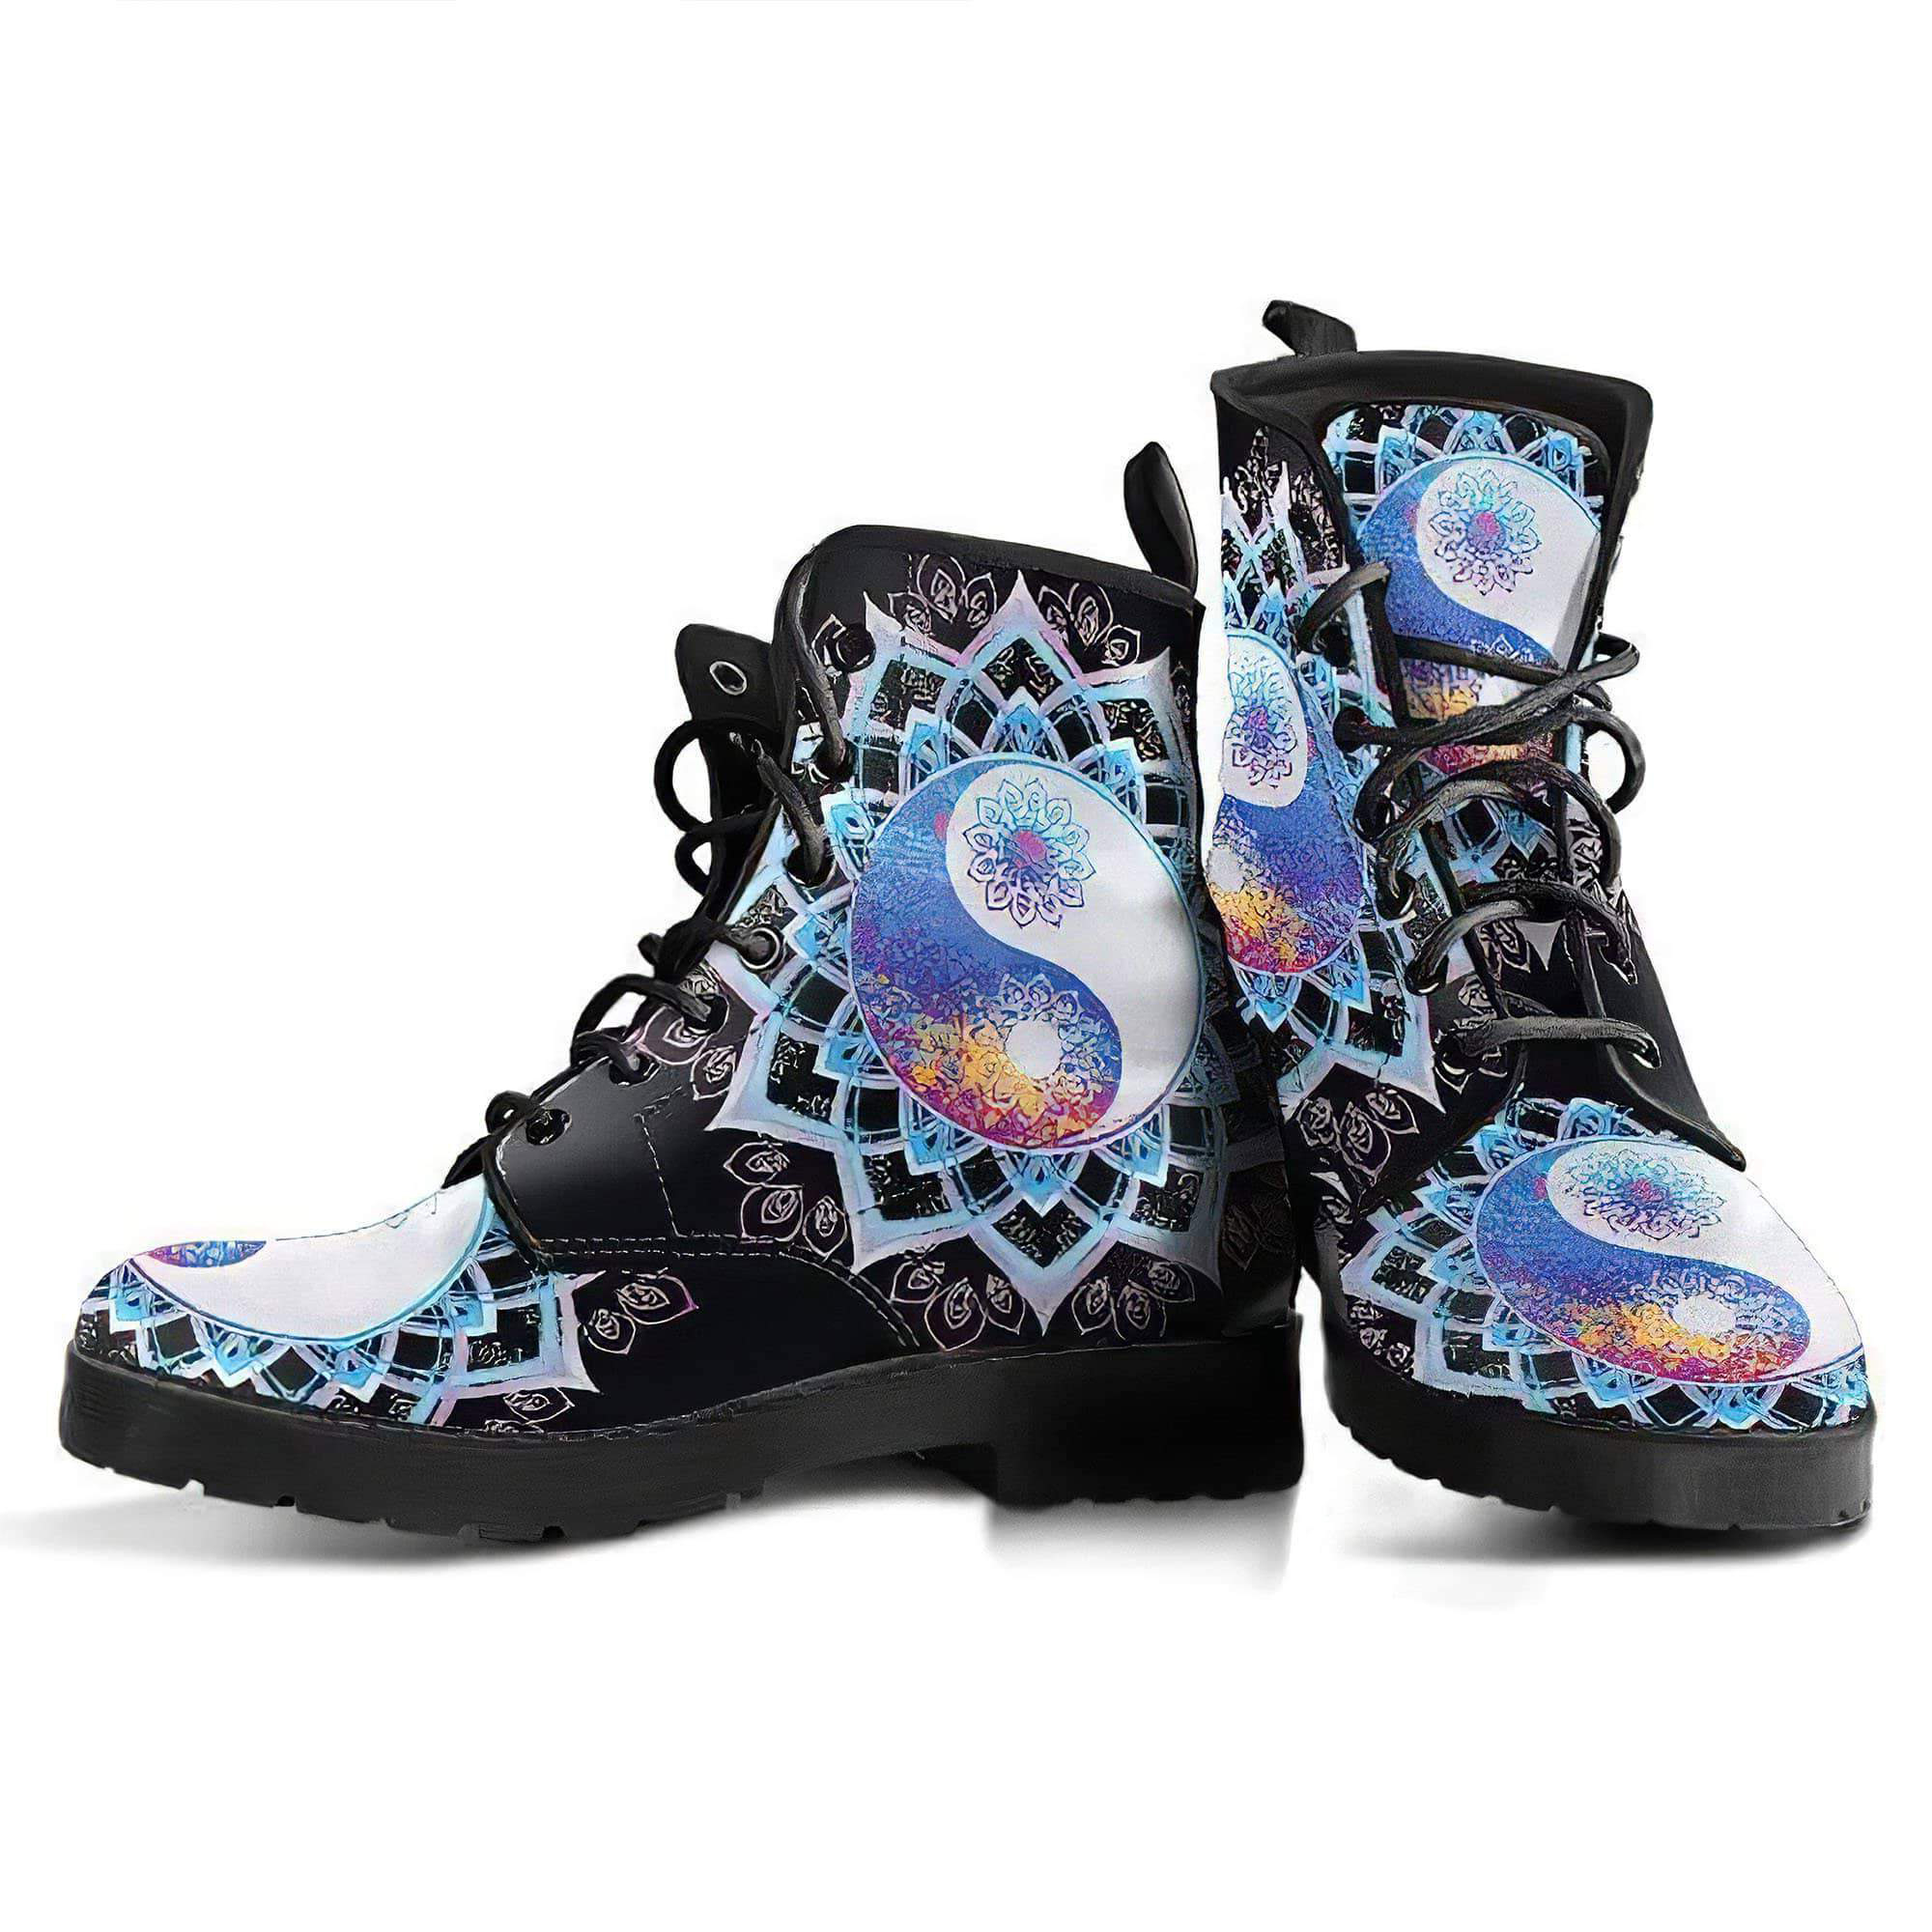 yinyang-mandala-1-handcrafted-boots-women-s-leather-boots-12051981205565.jpg